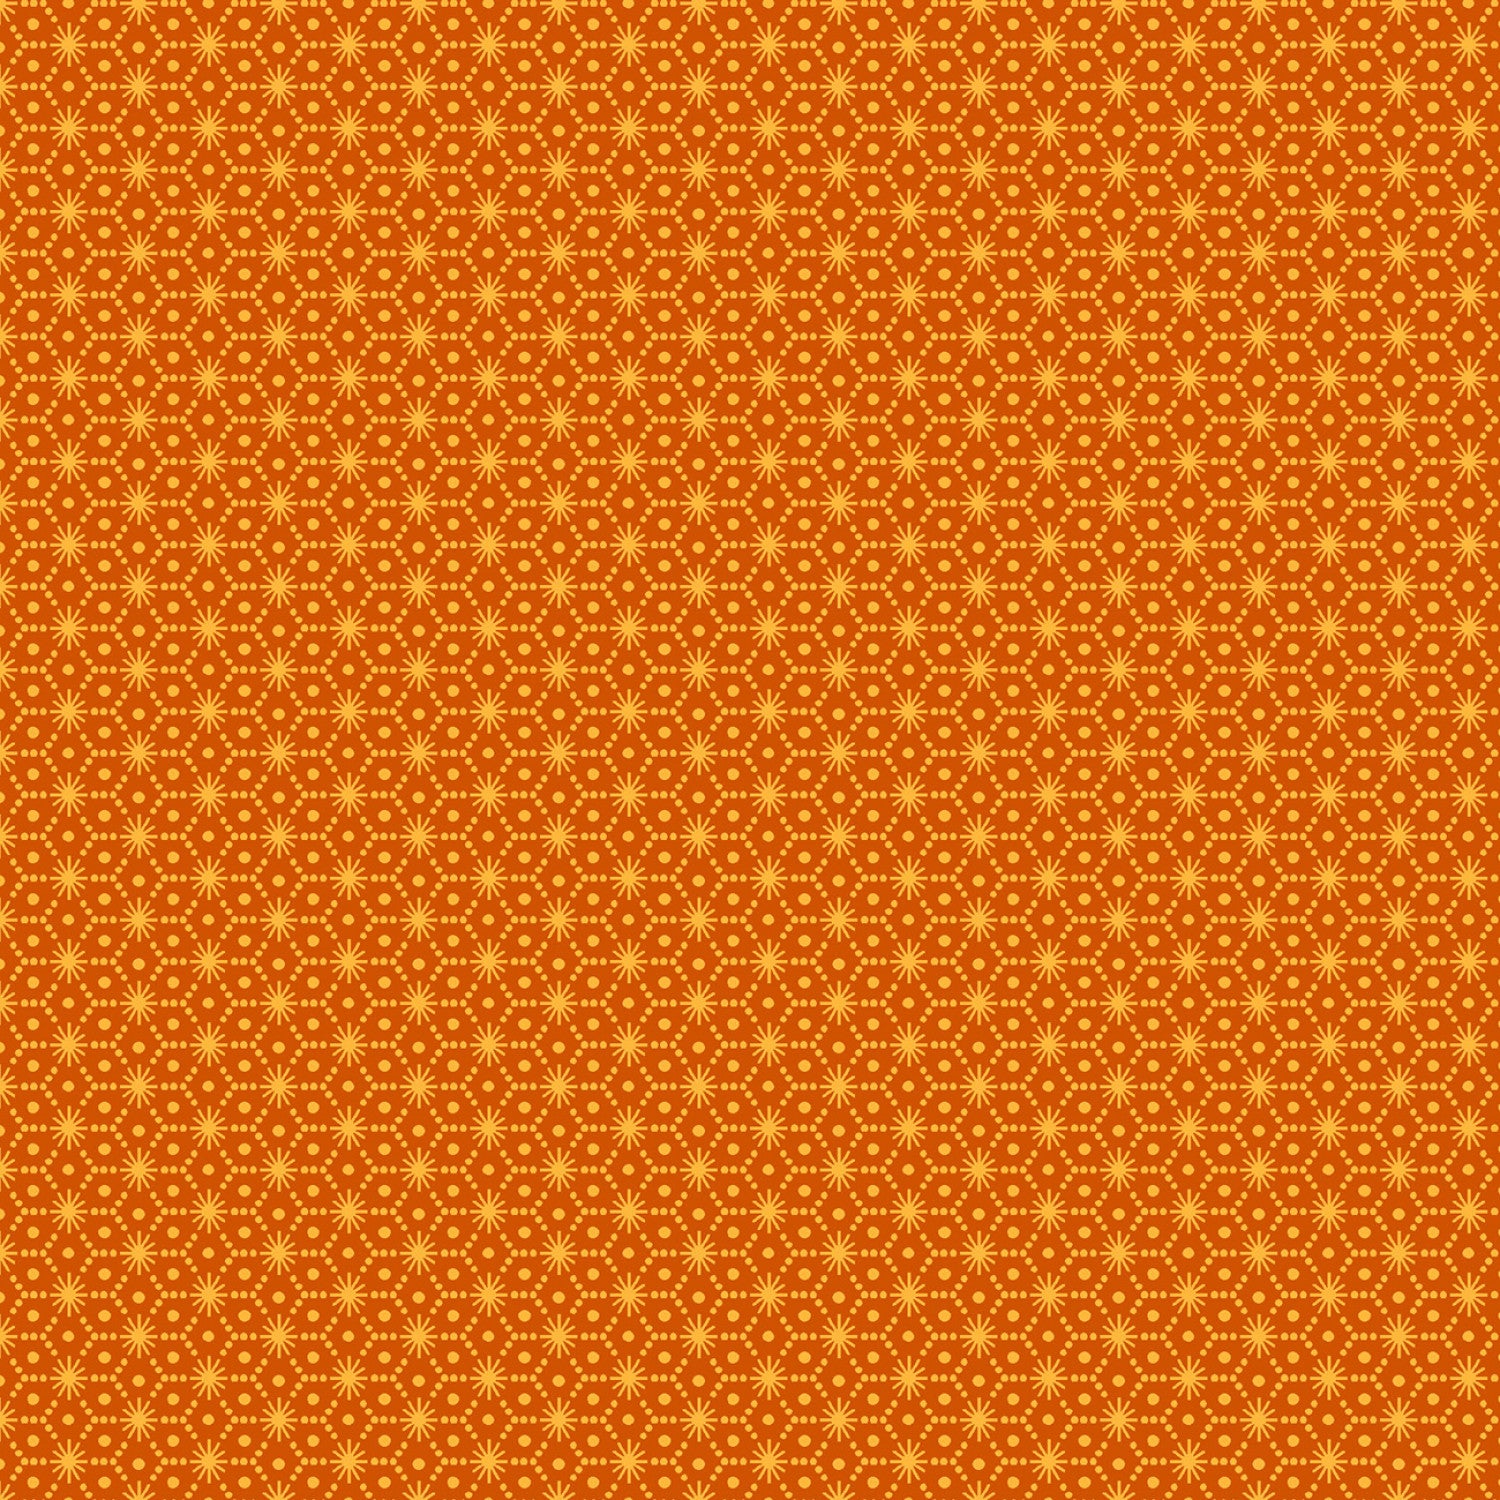 No Tricks, Just Treats | Orange/Yellow Hex Star by Hannah West for Henry Glass